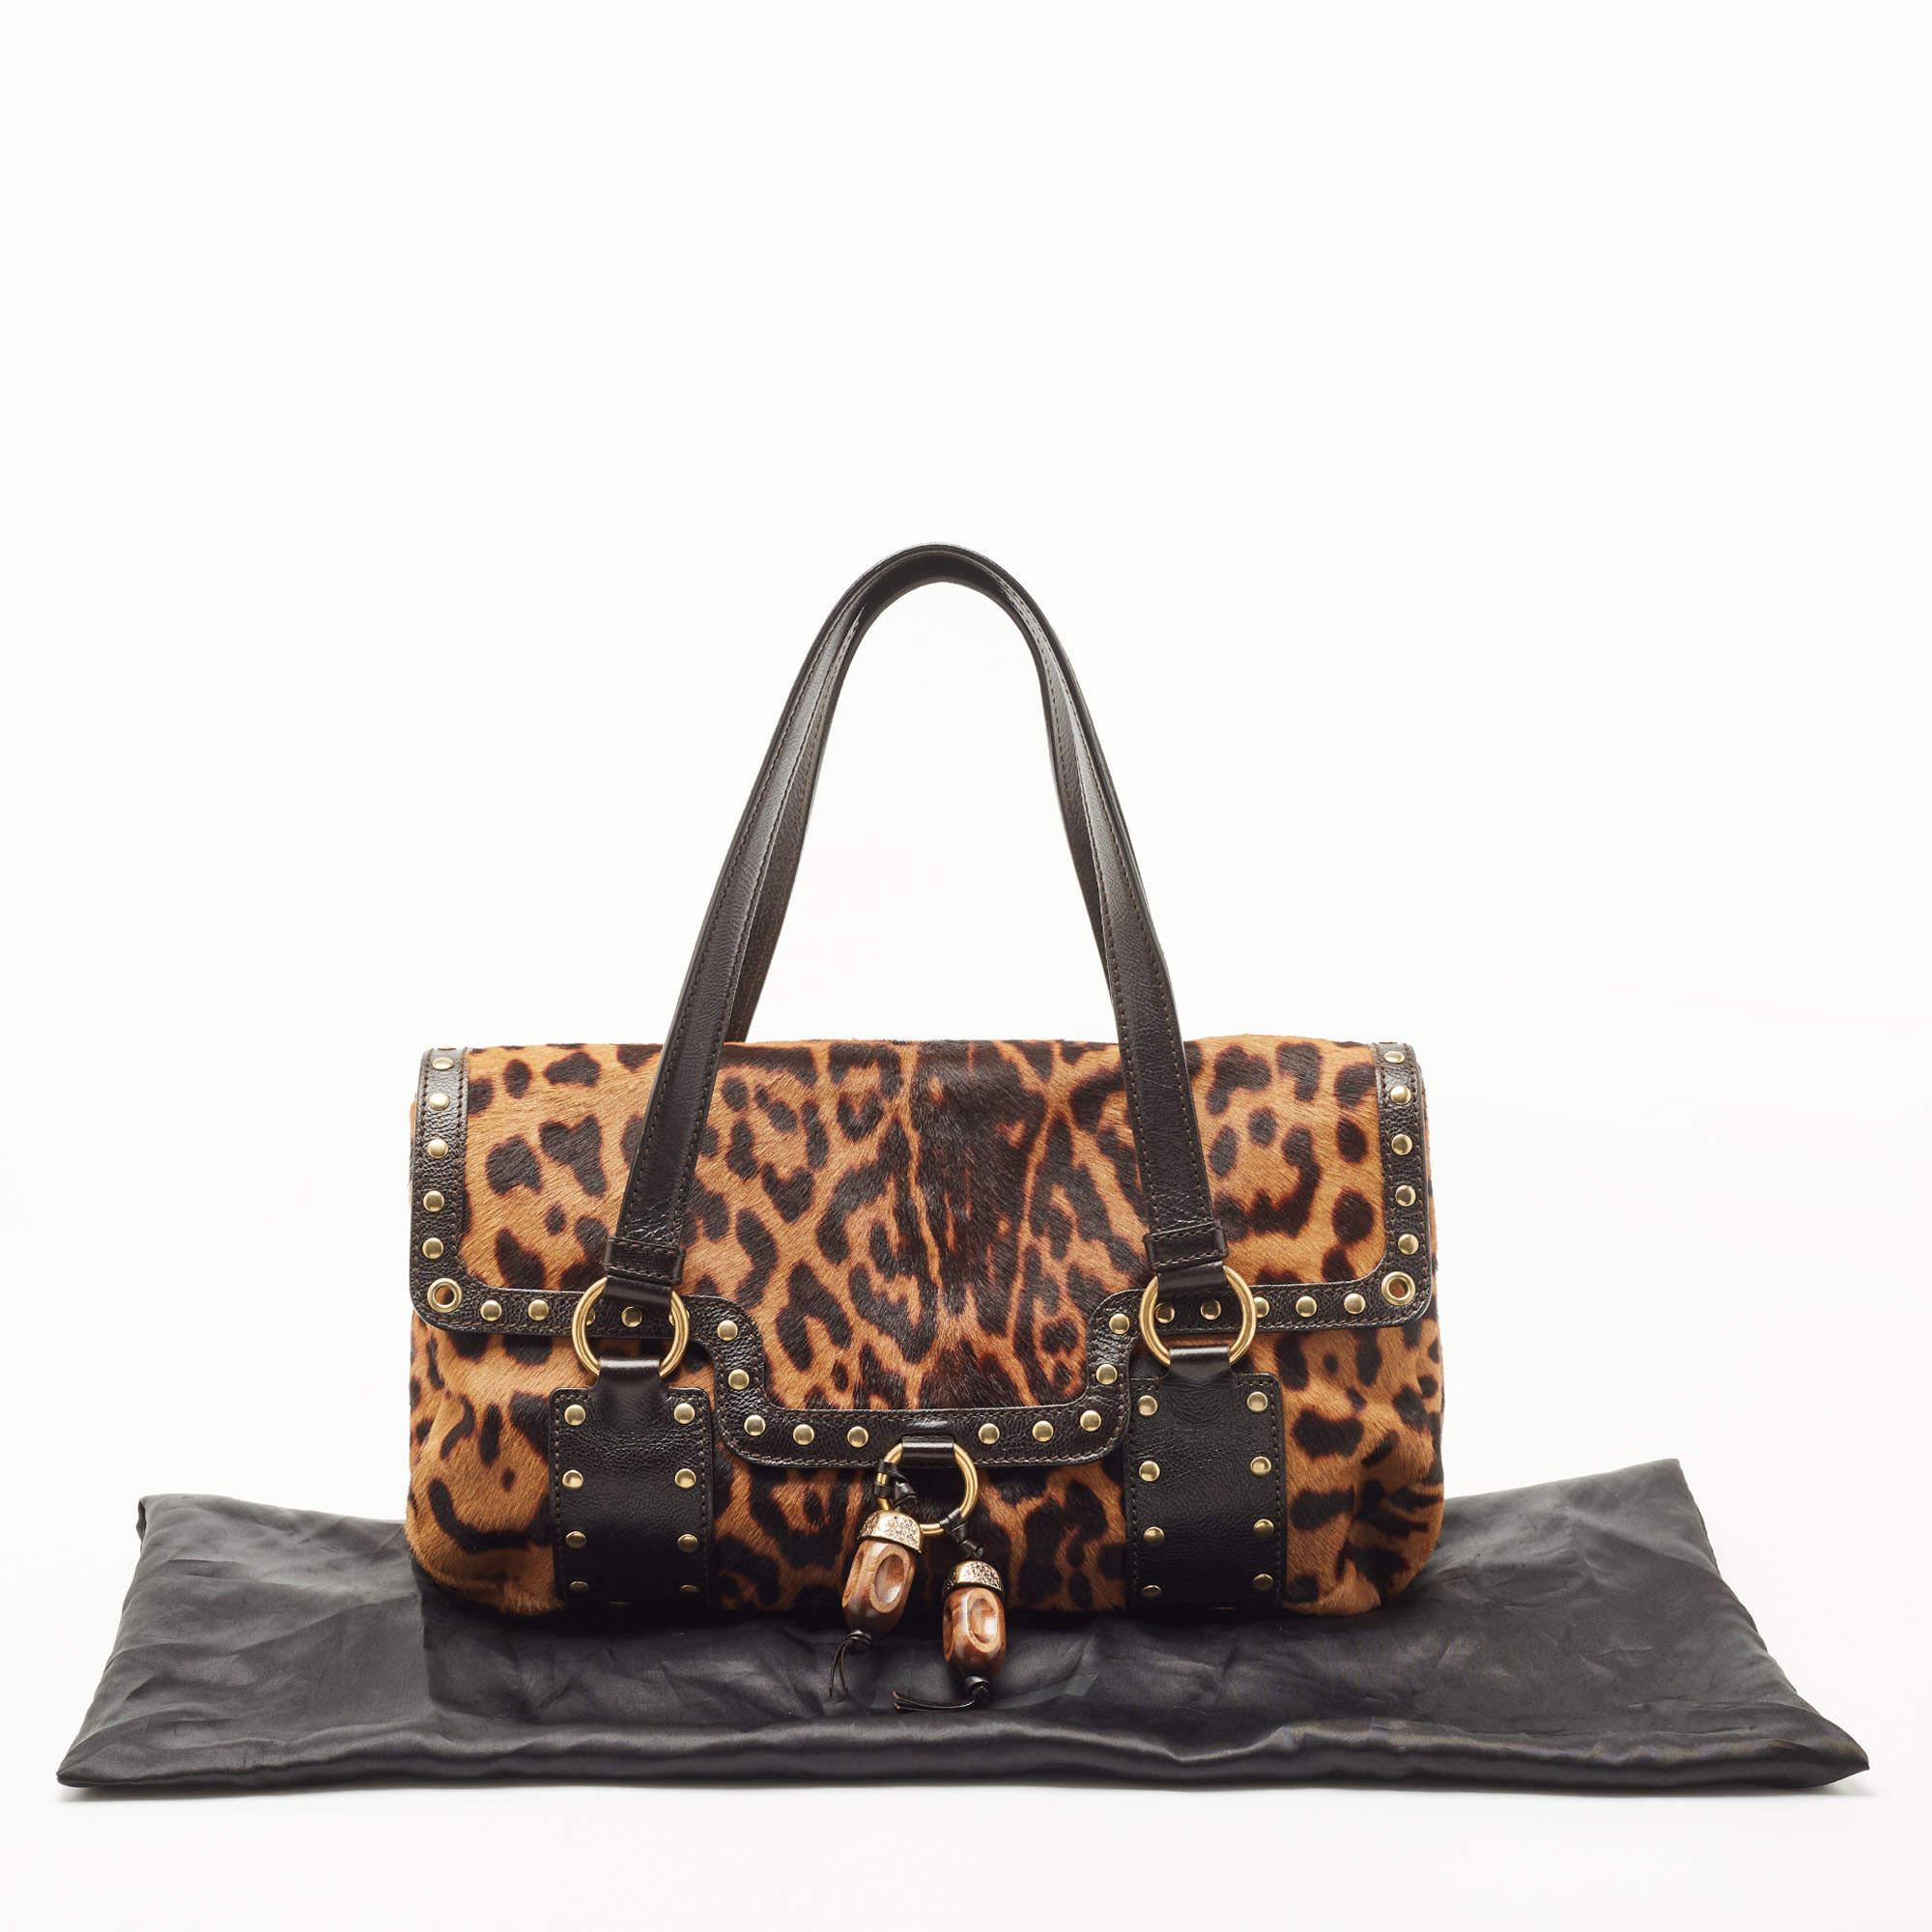 Yves Saint Laurent Brown Leopard Print Calfhair and Leather Studded Flap Satchel 12